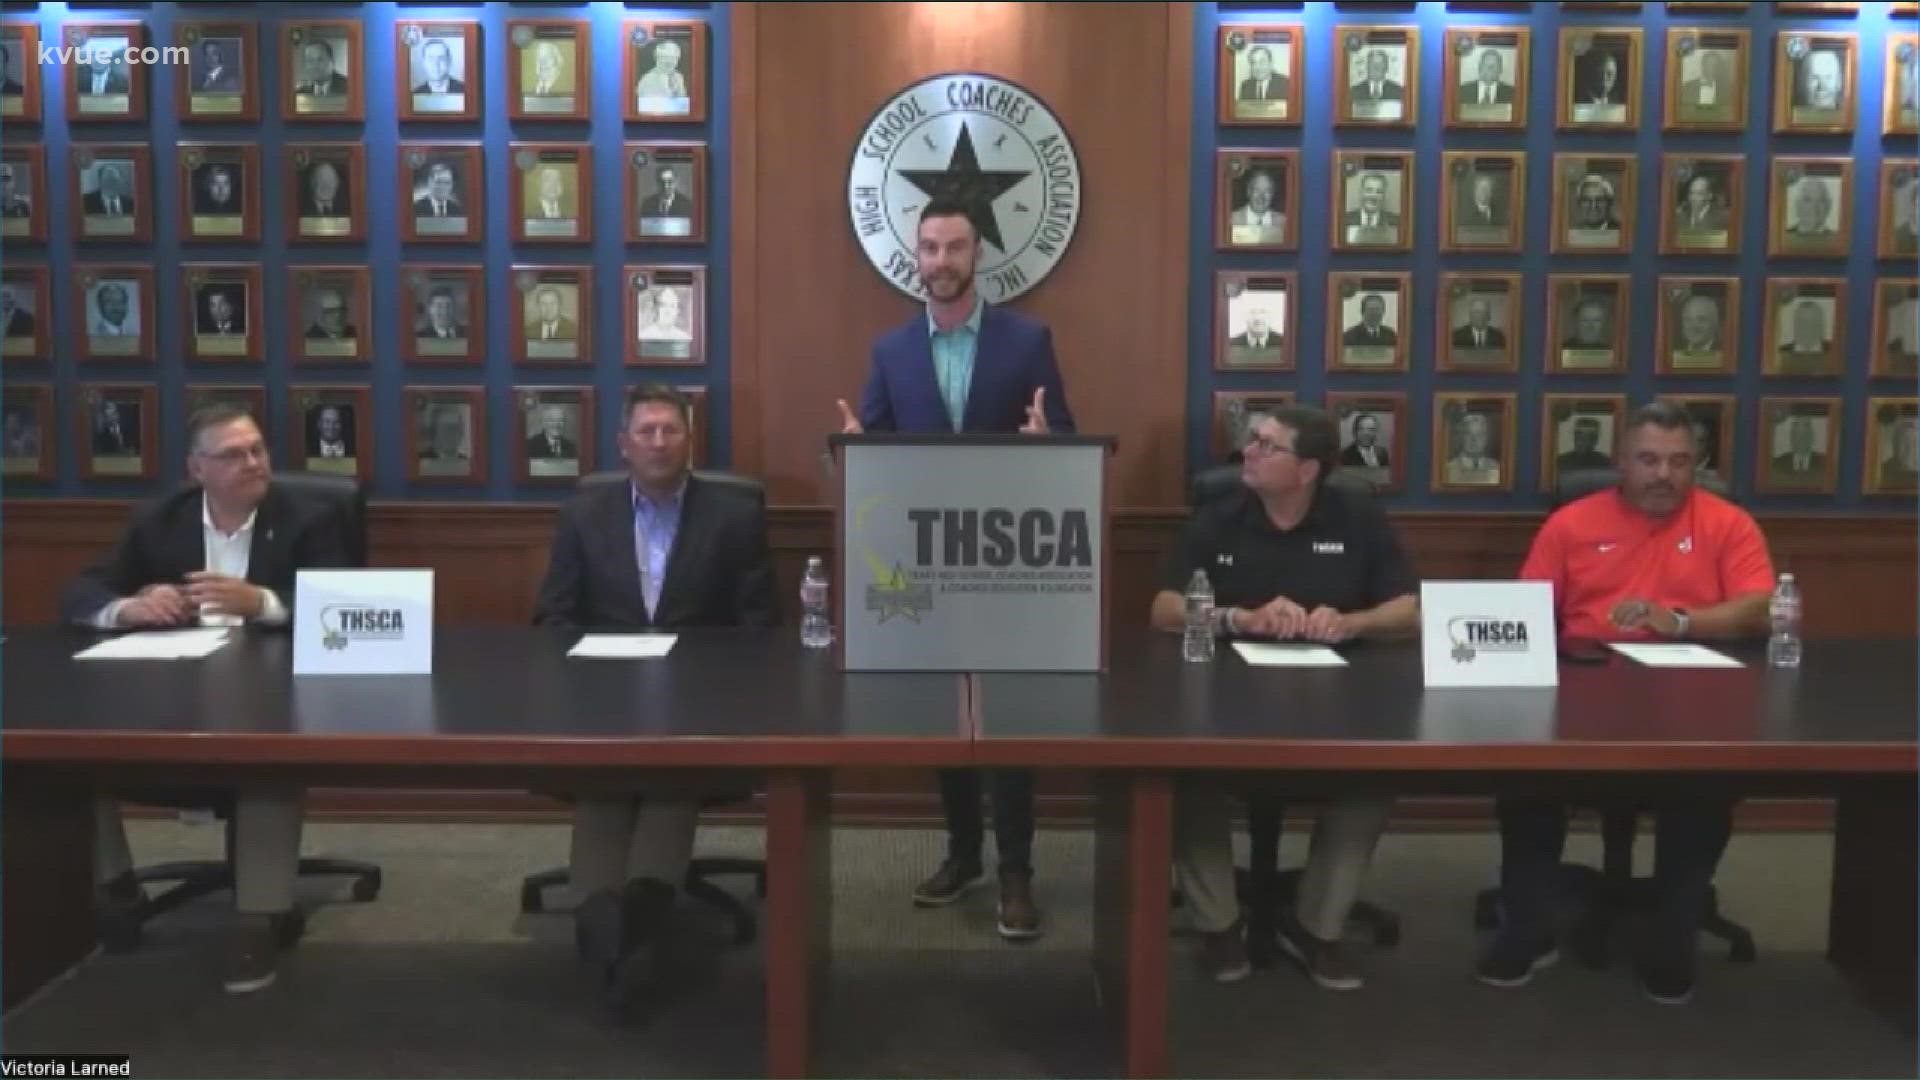 KVUE's Tyler Feldman moderated a panel with the Texas High School Coaches Association and Eccker Sports – a company built to translate name, image and likeness laws.